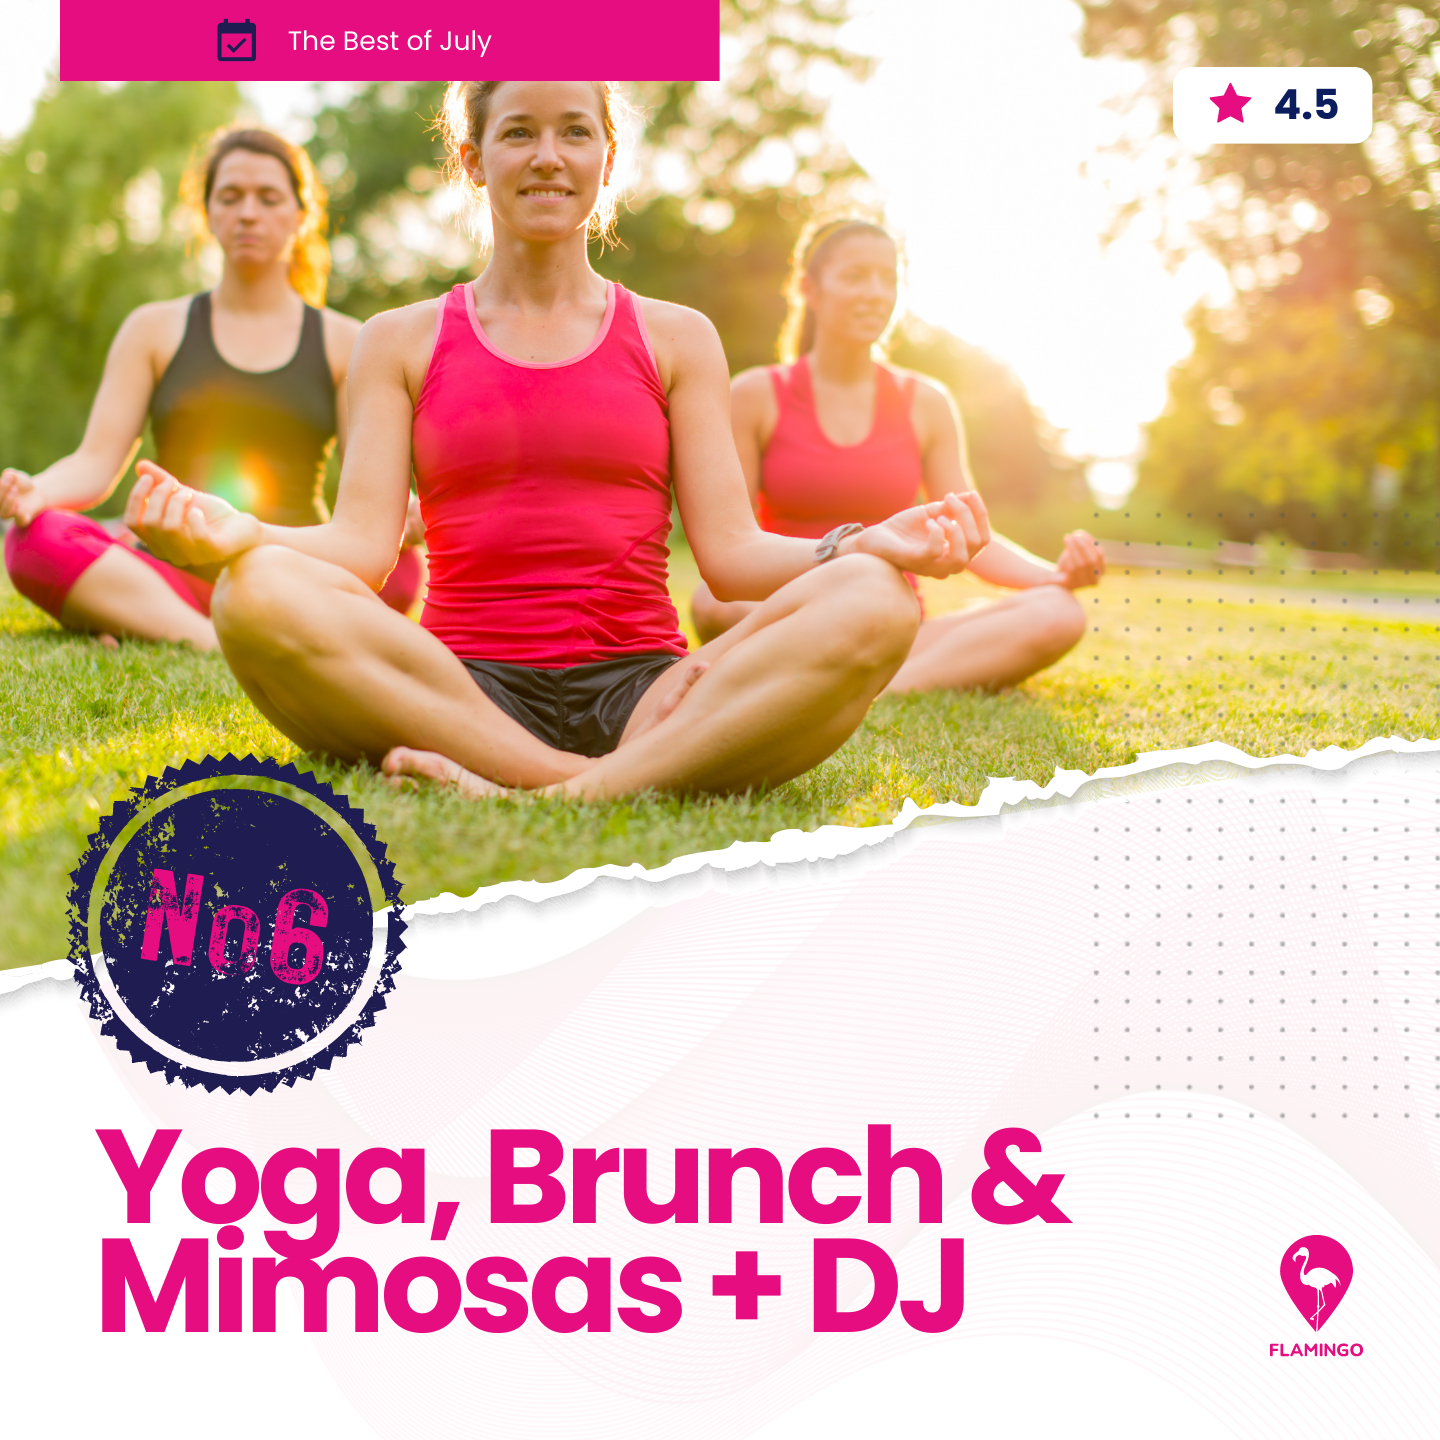 Yoga & Brunch | resident event ideas for july